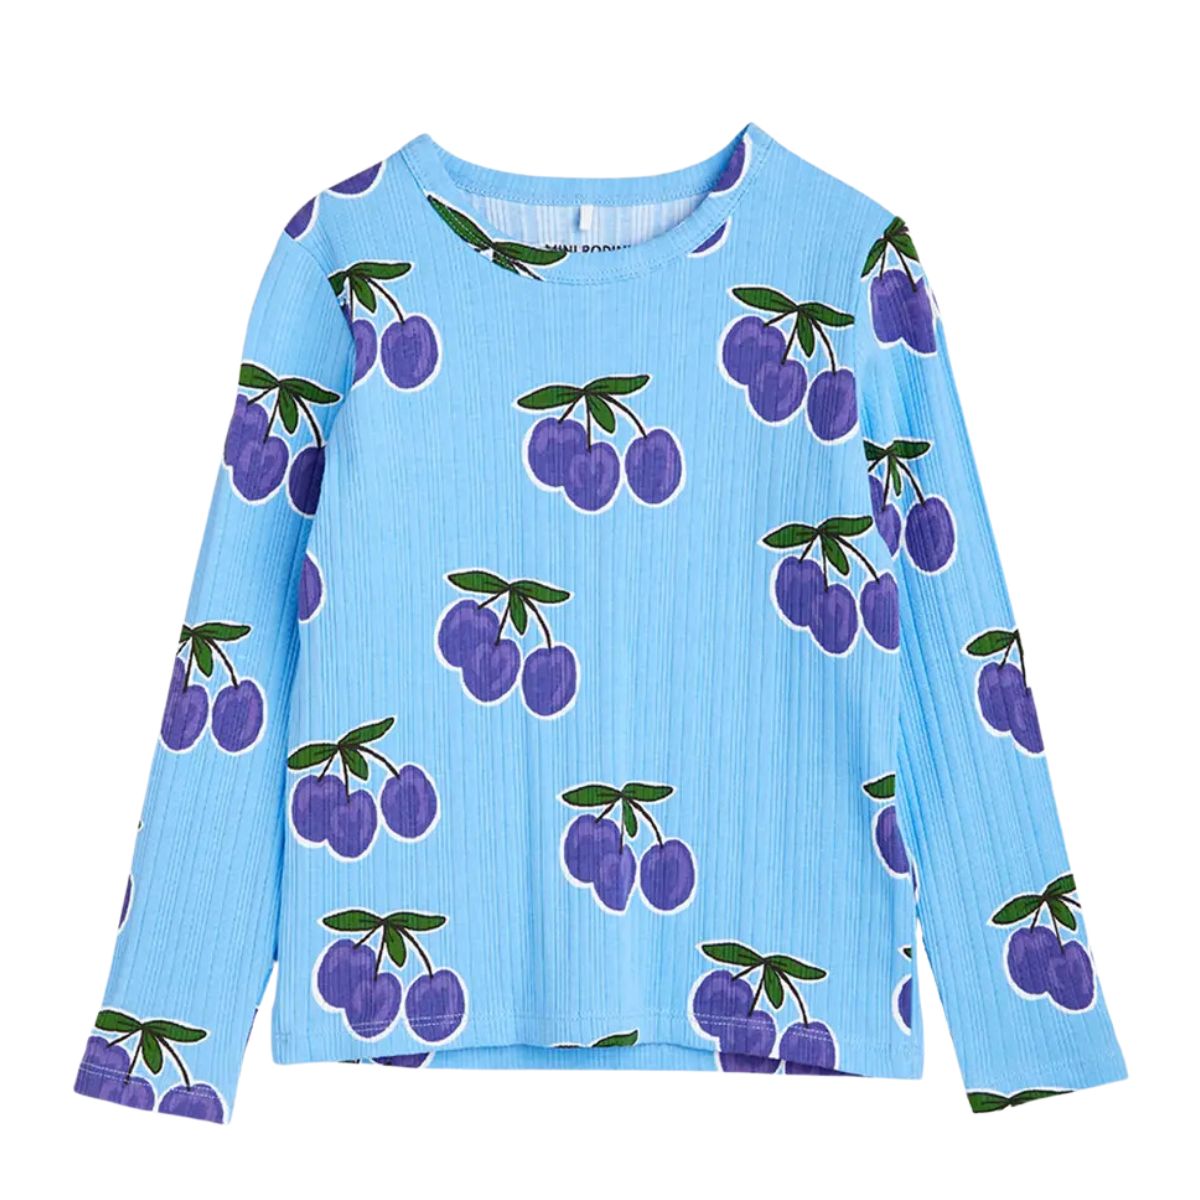 Plum Long Sleeve Tee by Mini Rodini. Blue ribbed long sleeve T-shirt with an all over print, made from GOTS certified organic cotton